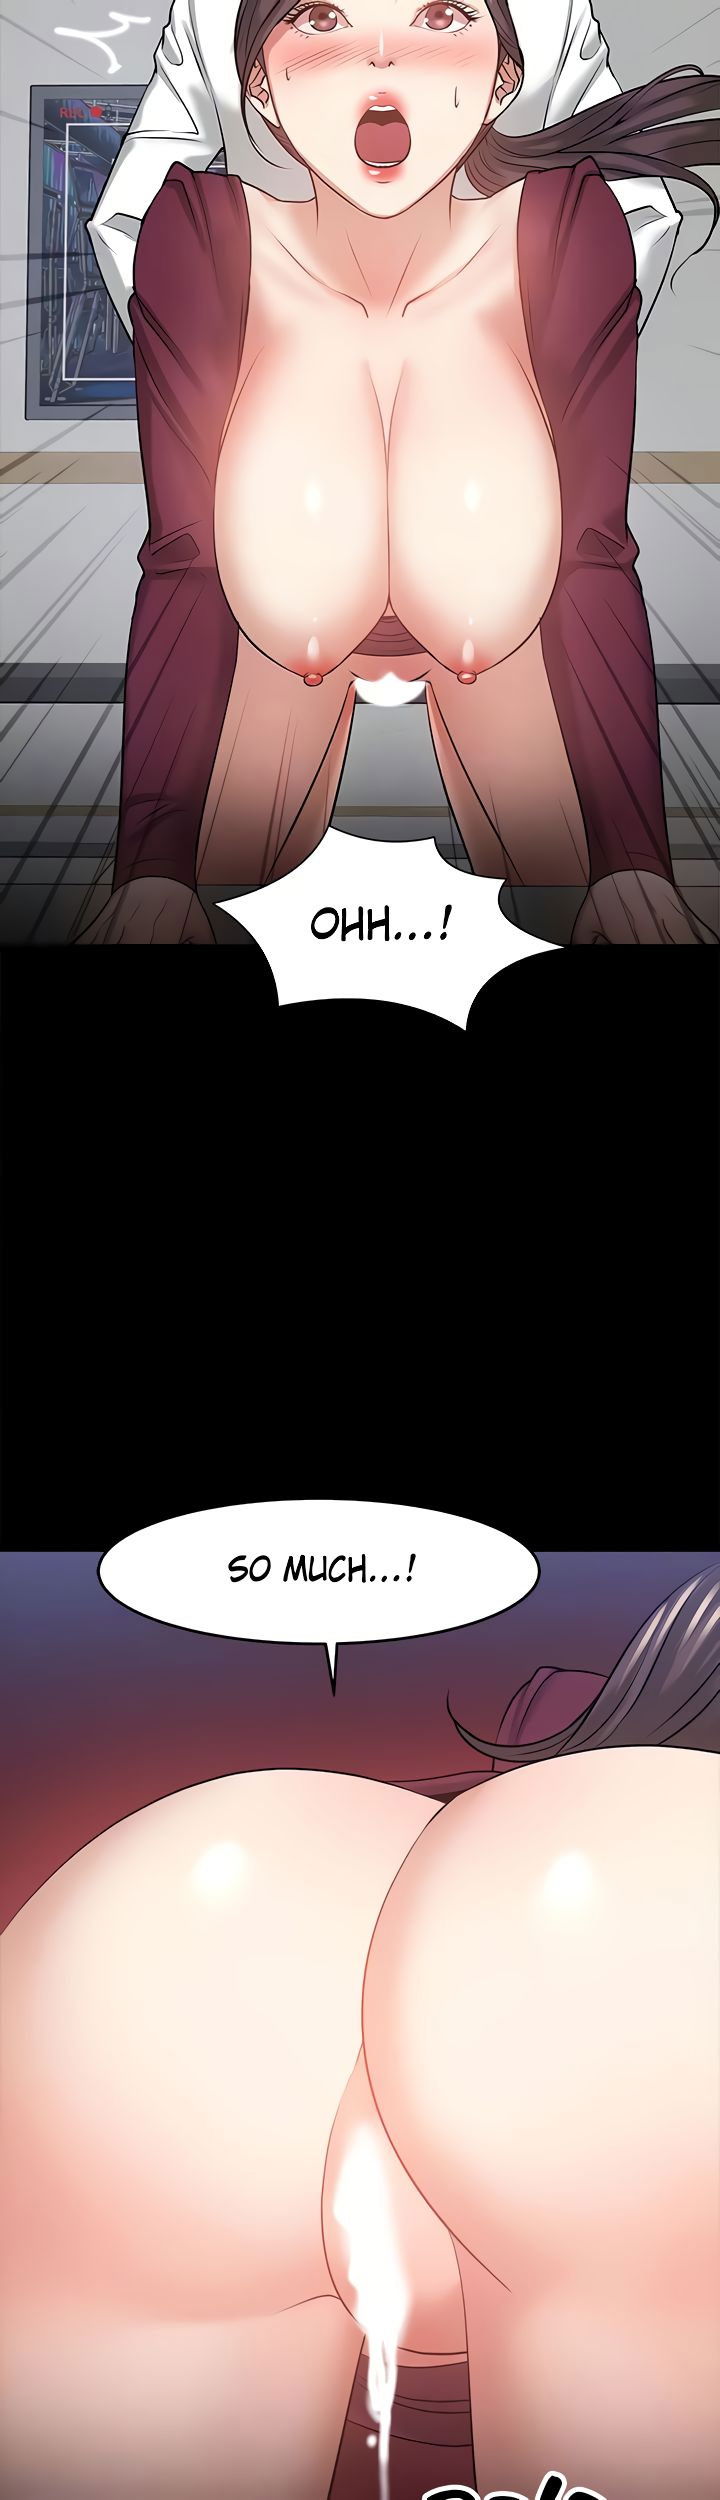 are-you-just-going-to-watch-chap-40-38